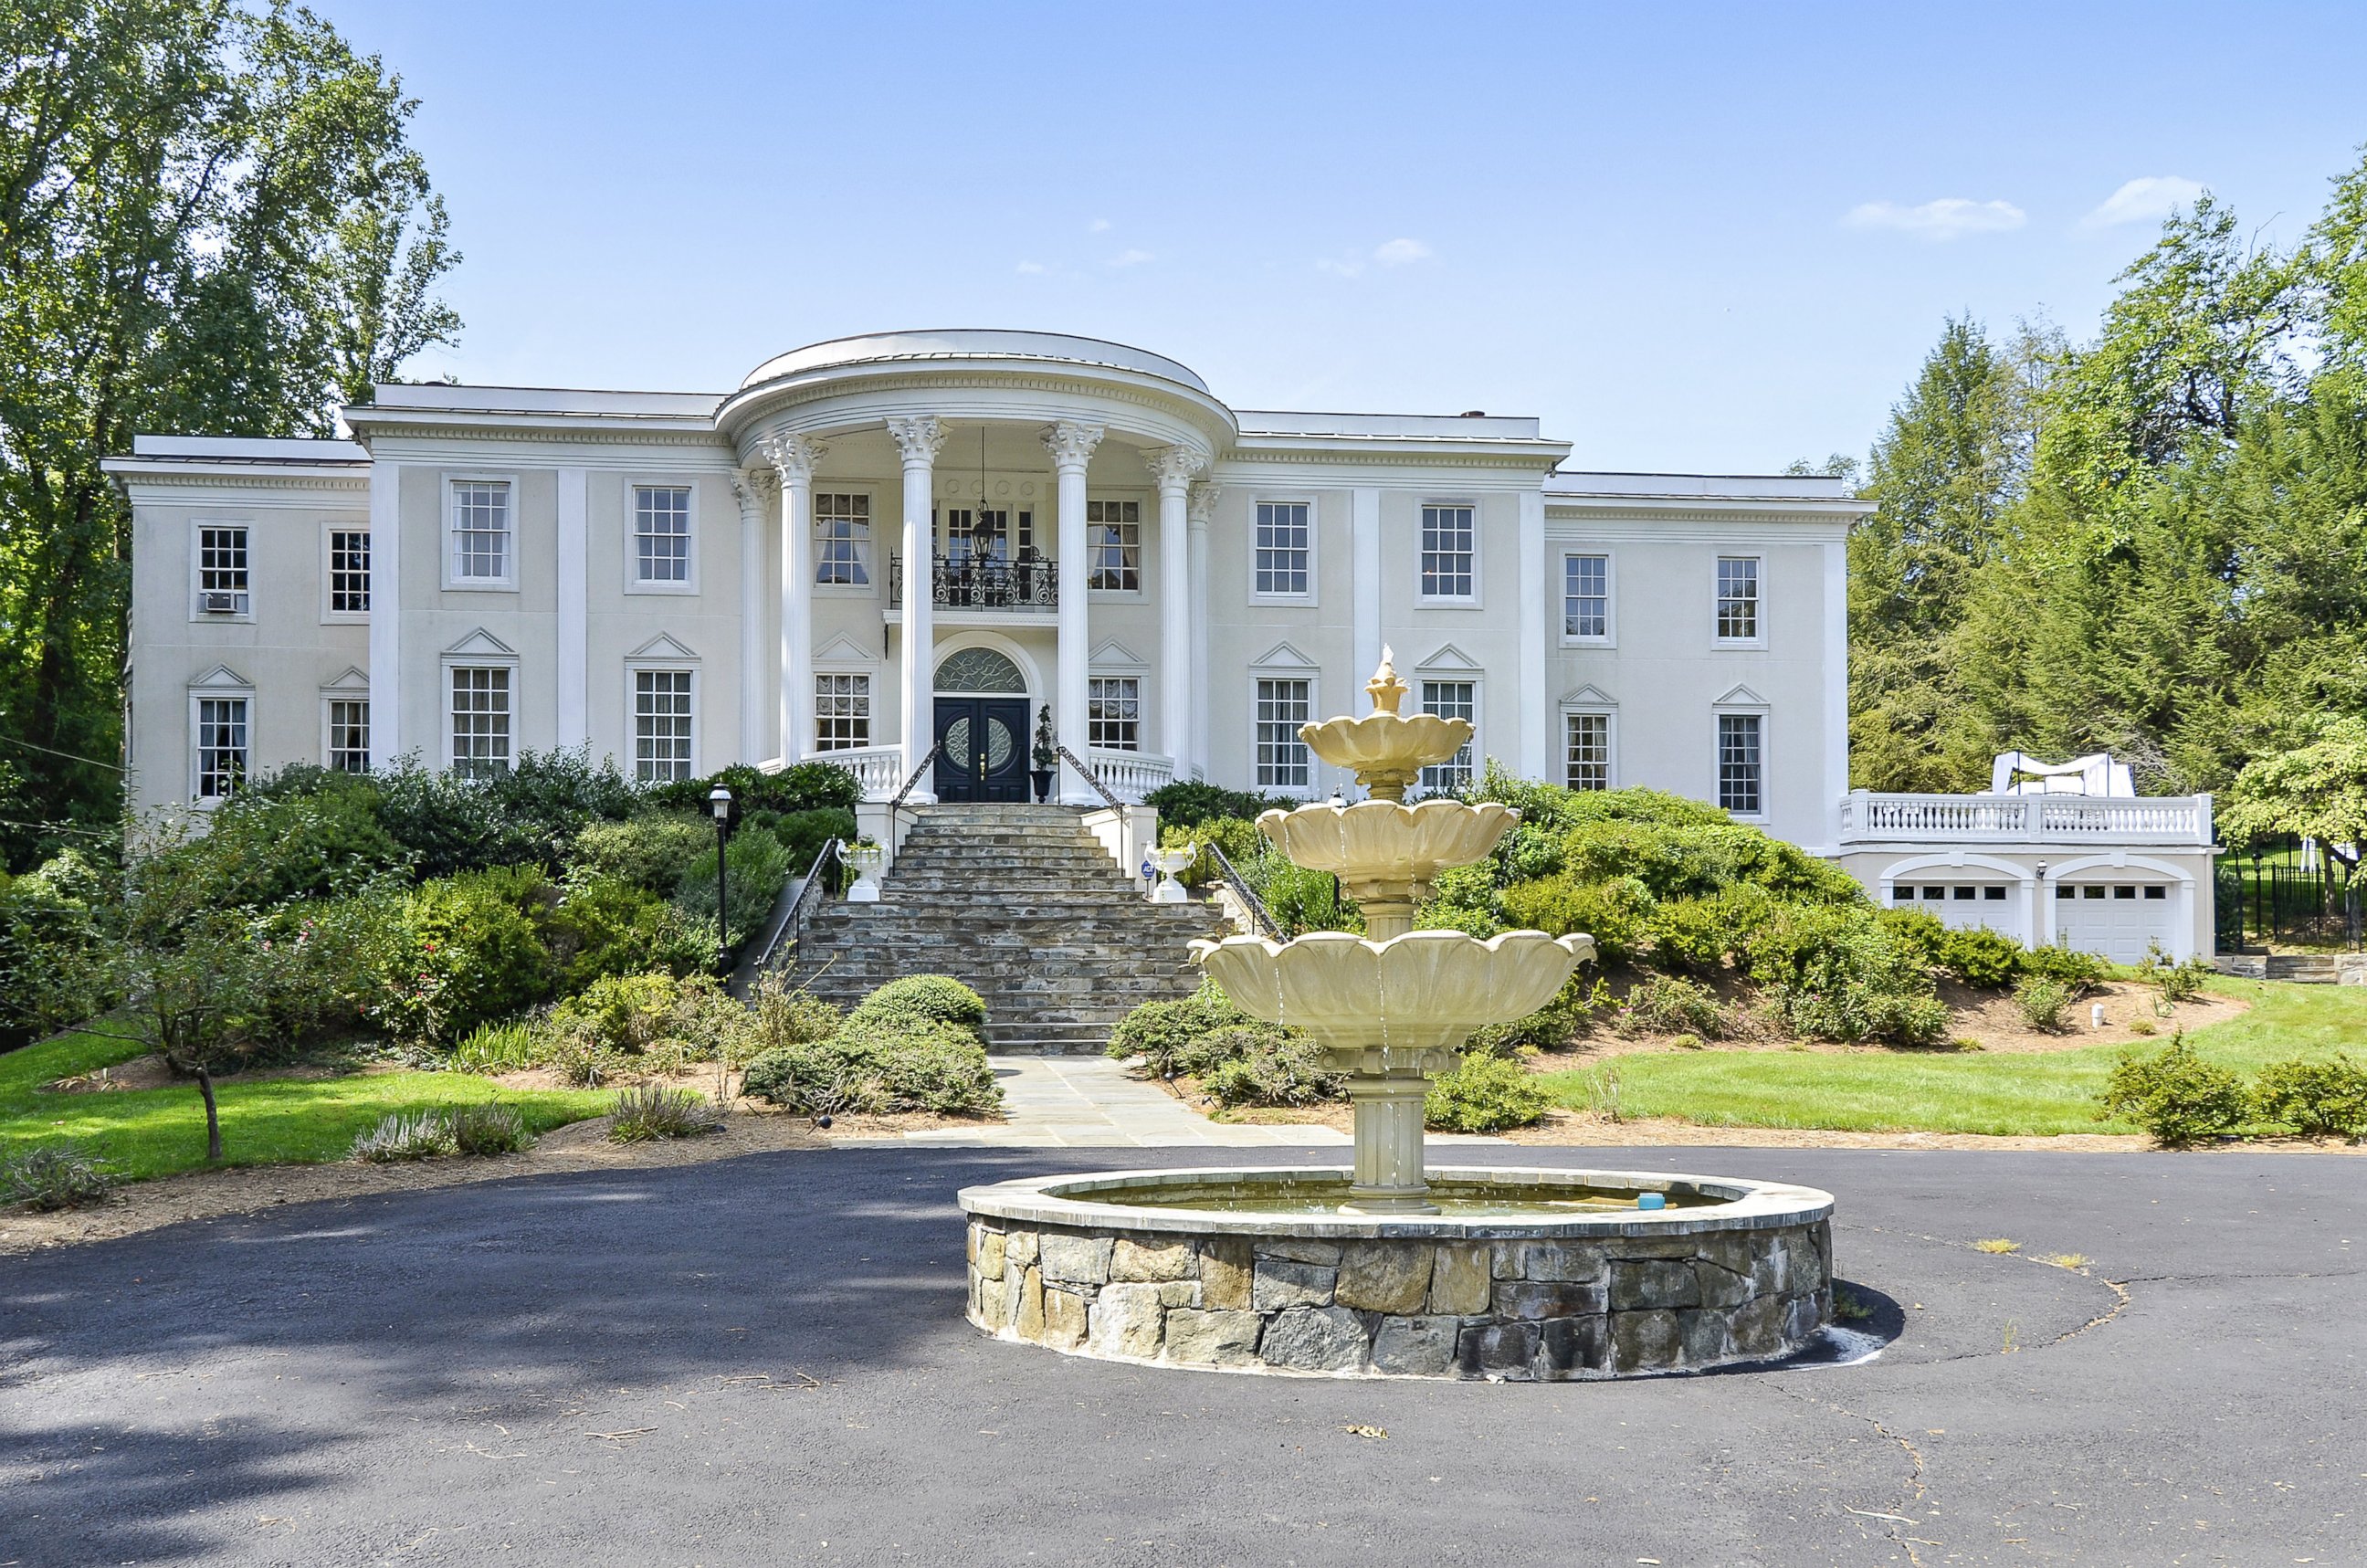 PHOTO: This house on Georgetown Pike features a curved portico and towering columns similar to the White House. 